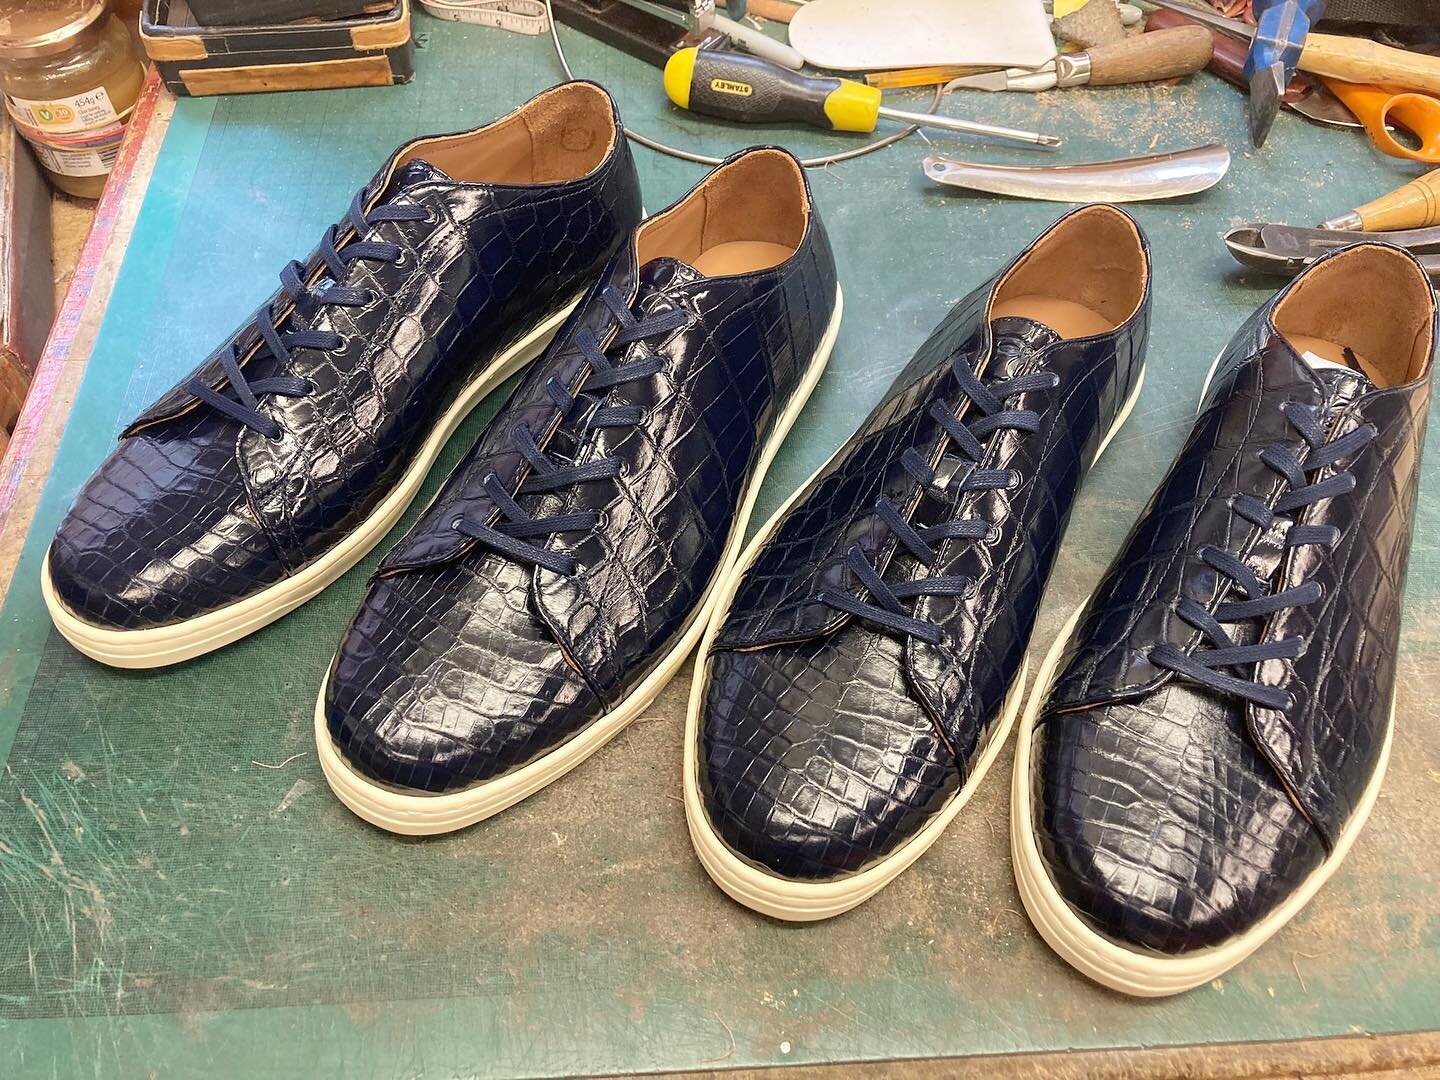 Just finished!  The &lsquo;Jack&rsquo; in millennium blue alligator. Our first trainer has received phenomenal response from around the world and offered bespoke in many unique materials.  Shown here is just one recent example. #geprgecleverley #besp